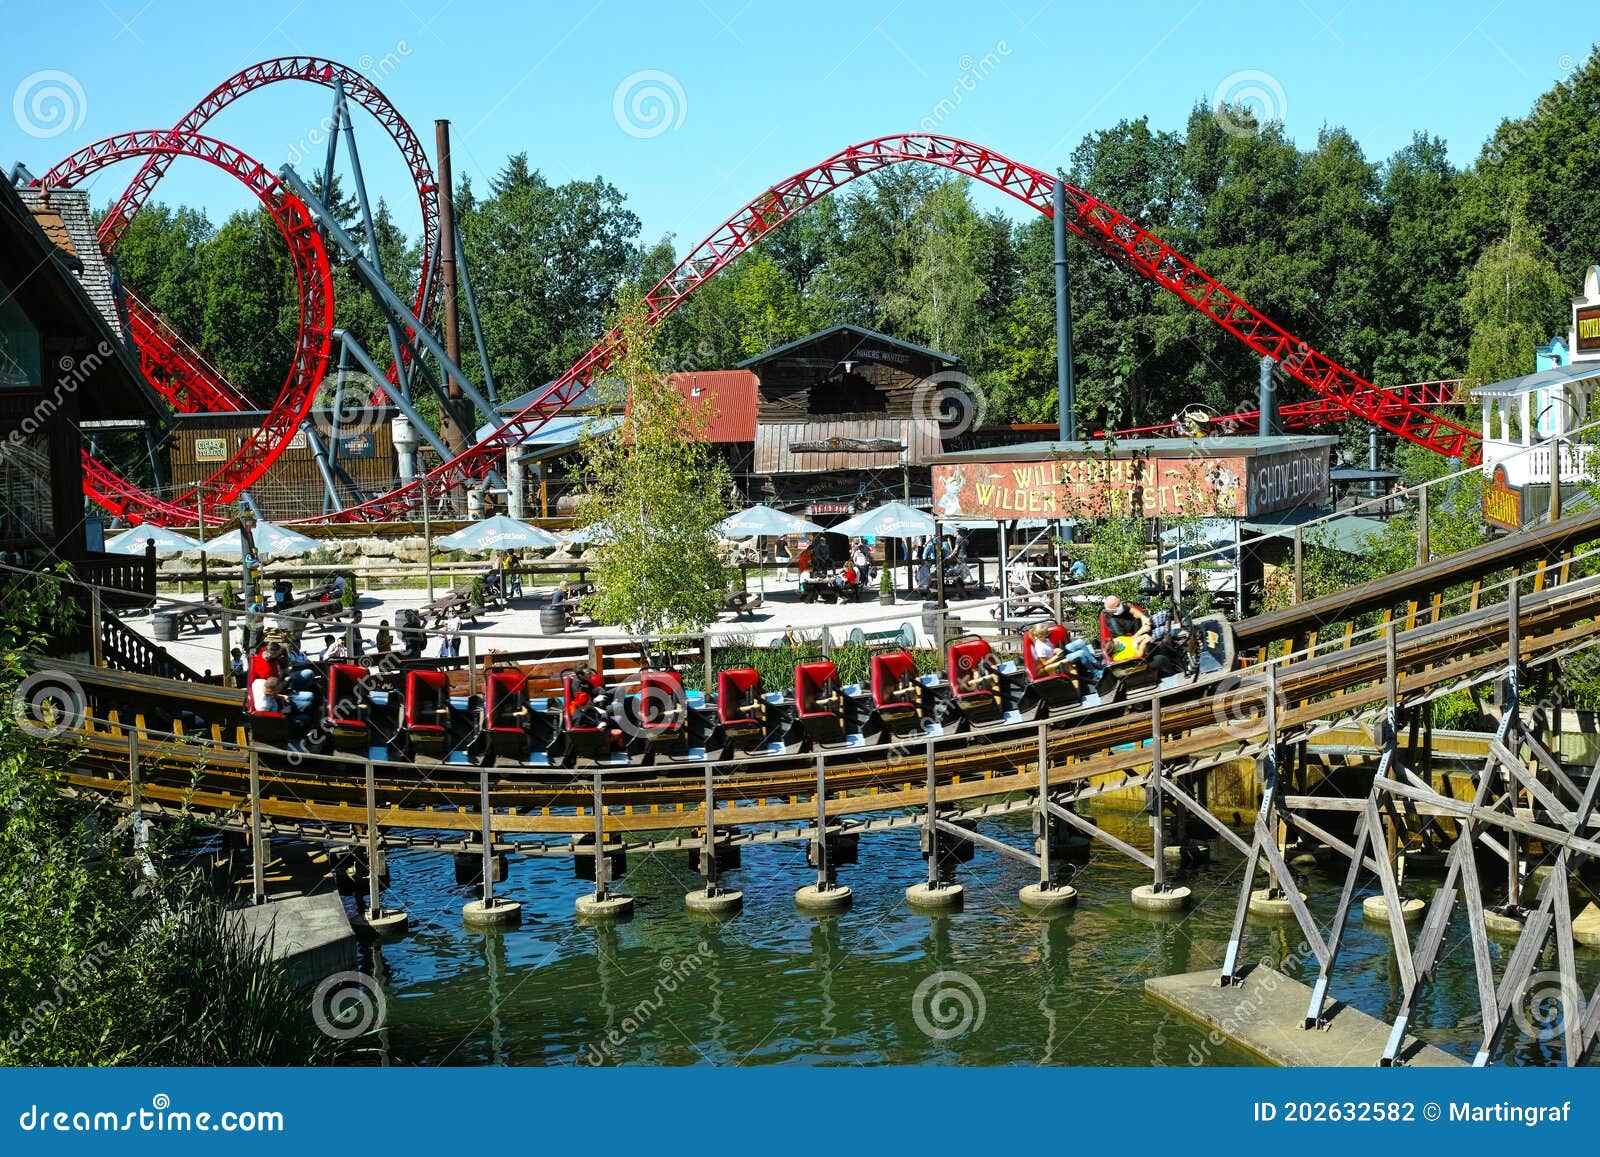 Theme Park Landscape with Wooden Coaster and Big Dipper Roller Coaster  Editorial Photography - Image of lake, dynamite: 202632582